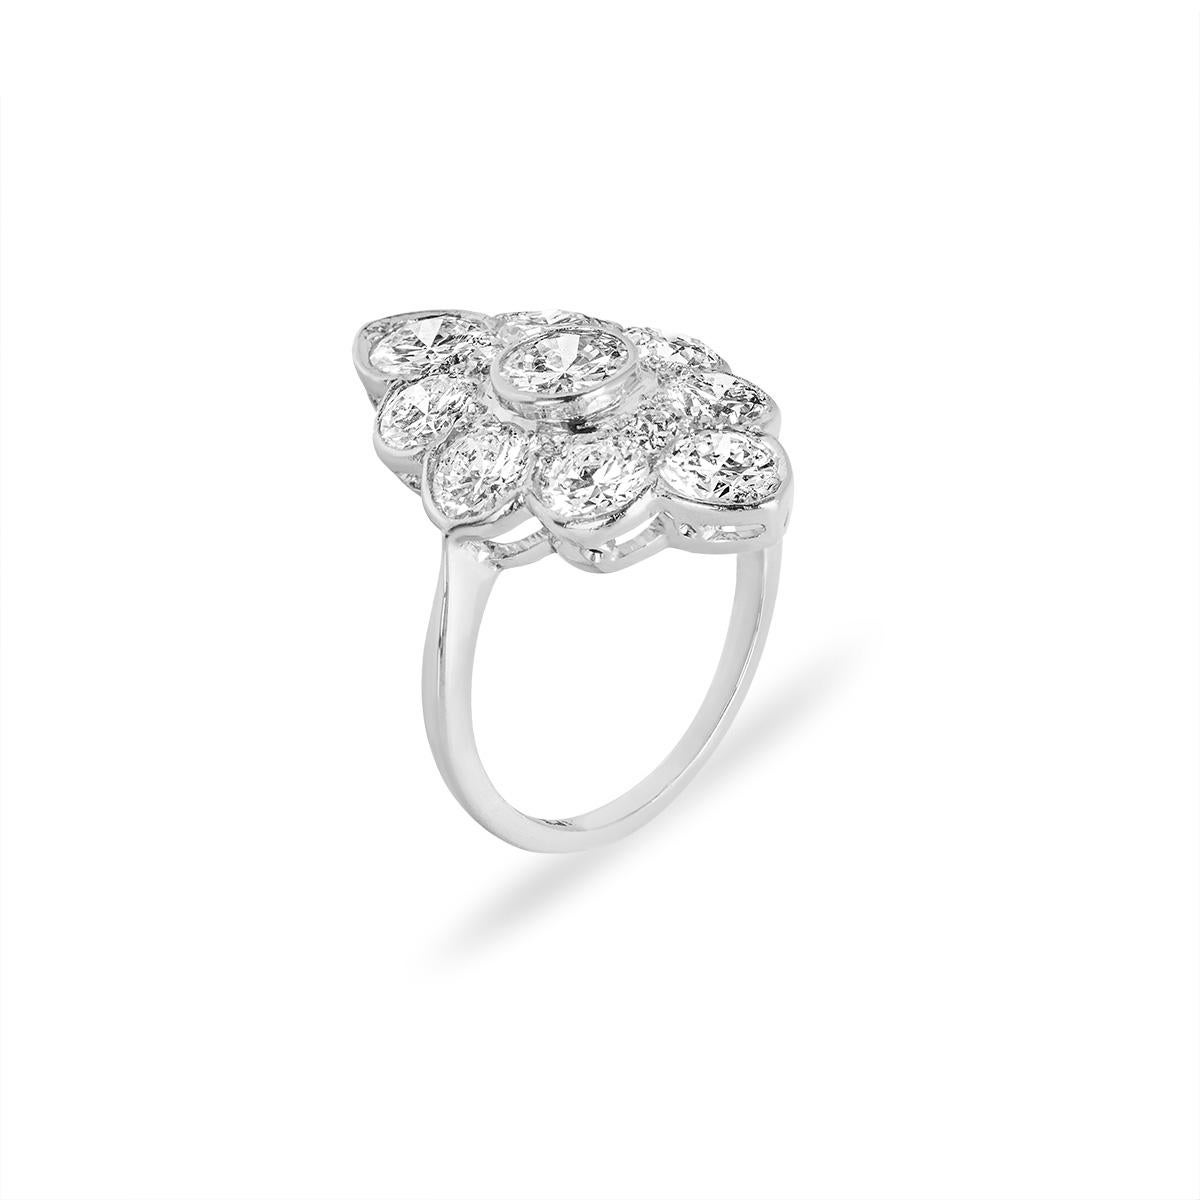 An alluring 18k white gold diamond navette ring. The ring features a marquise shape outline, set to the centre in a rubover setting with a round brilliant cut diamond weighing approximately 0.45ct, H-I colour and SI clarity. Adding to the allure of